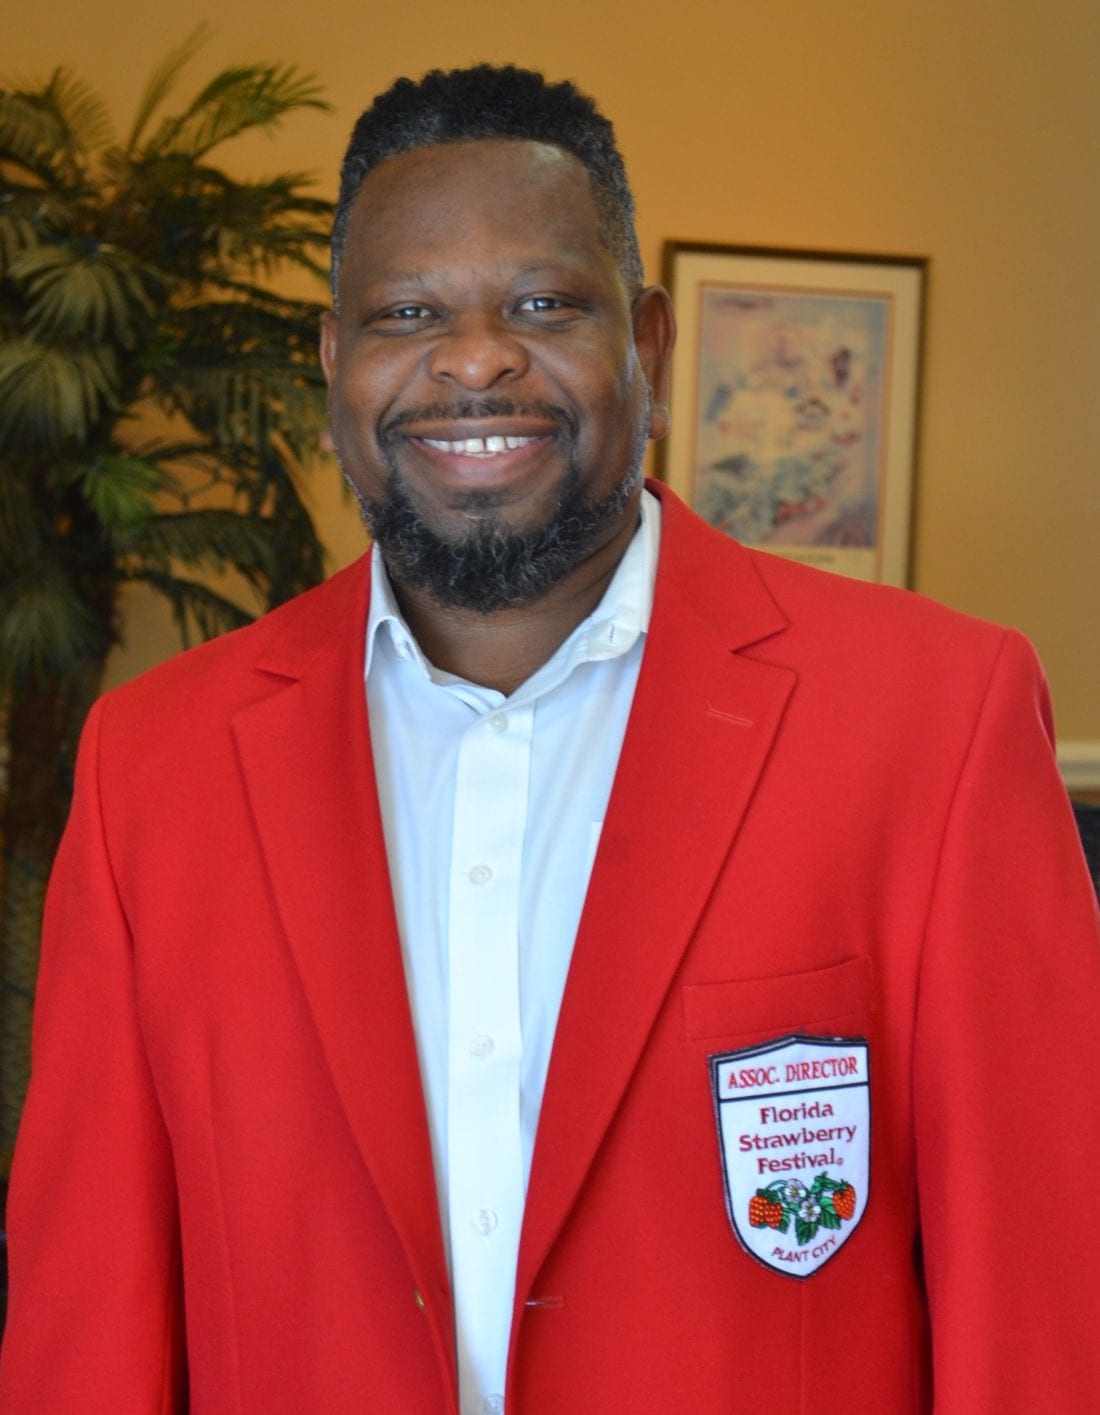 “My perfect vision would be seeing first-time attendee families arrive at the festival. Getting to see their initial reactions to the attractions, entertainment, vendors, rides and simply being able to watch them enjoy some family time at the 2020 event would be pretty perfect.” — Pastor Calvin “Pee Wee” Callins, Associate Director